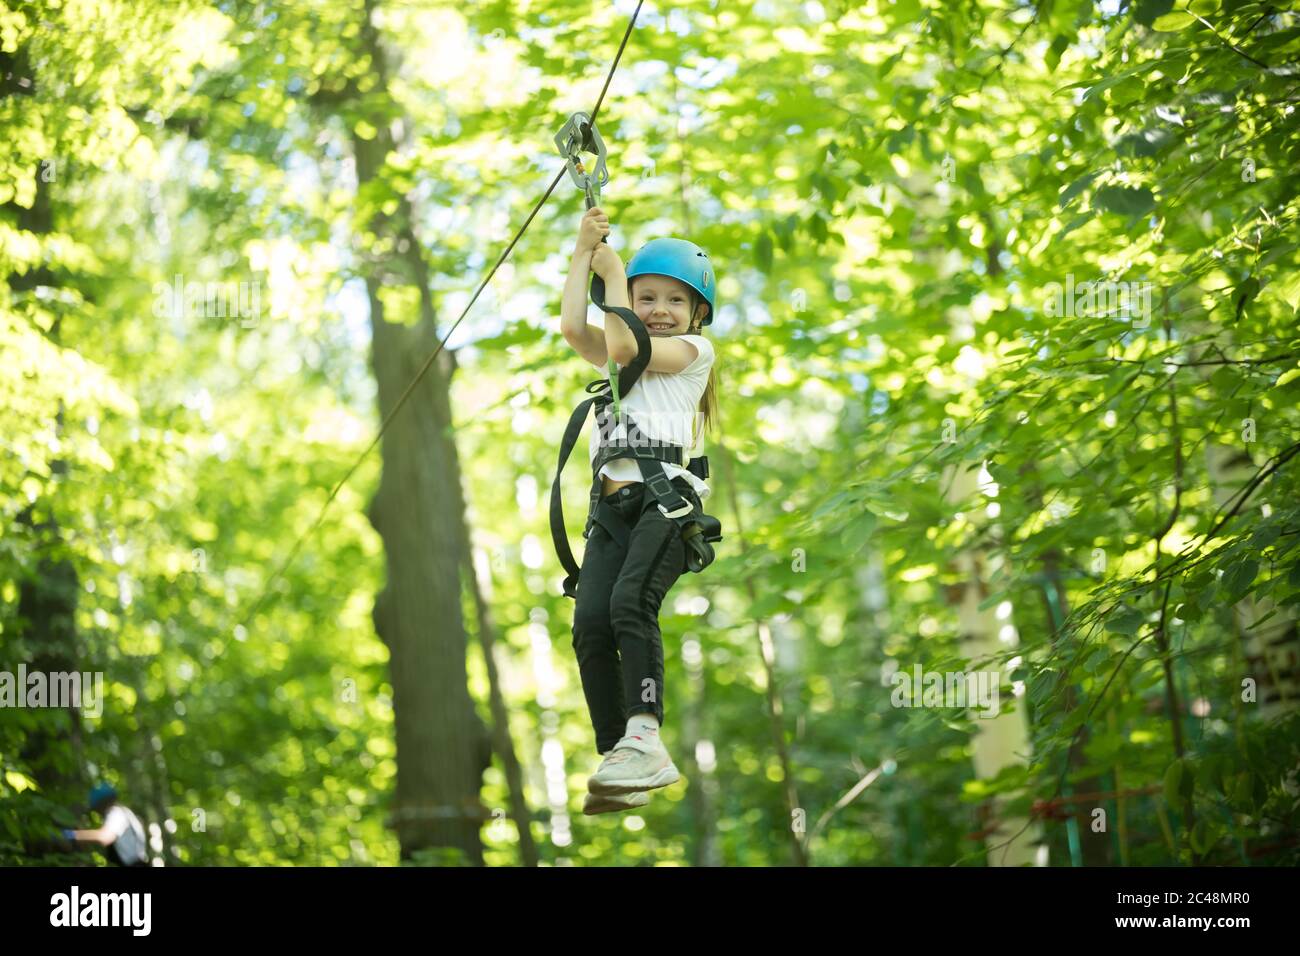 A little girl hanging on the insurance cable of her belt - rope bridge entertainment attraction. Mid shot Stock Photo